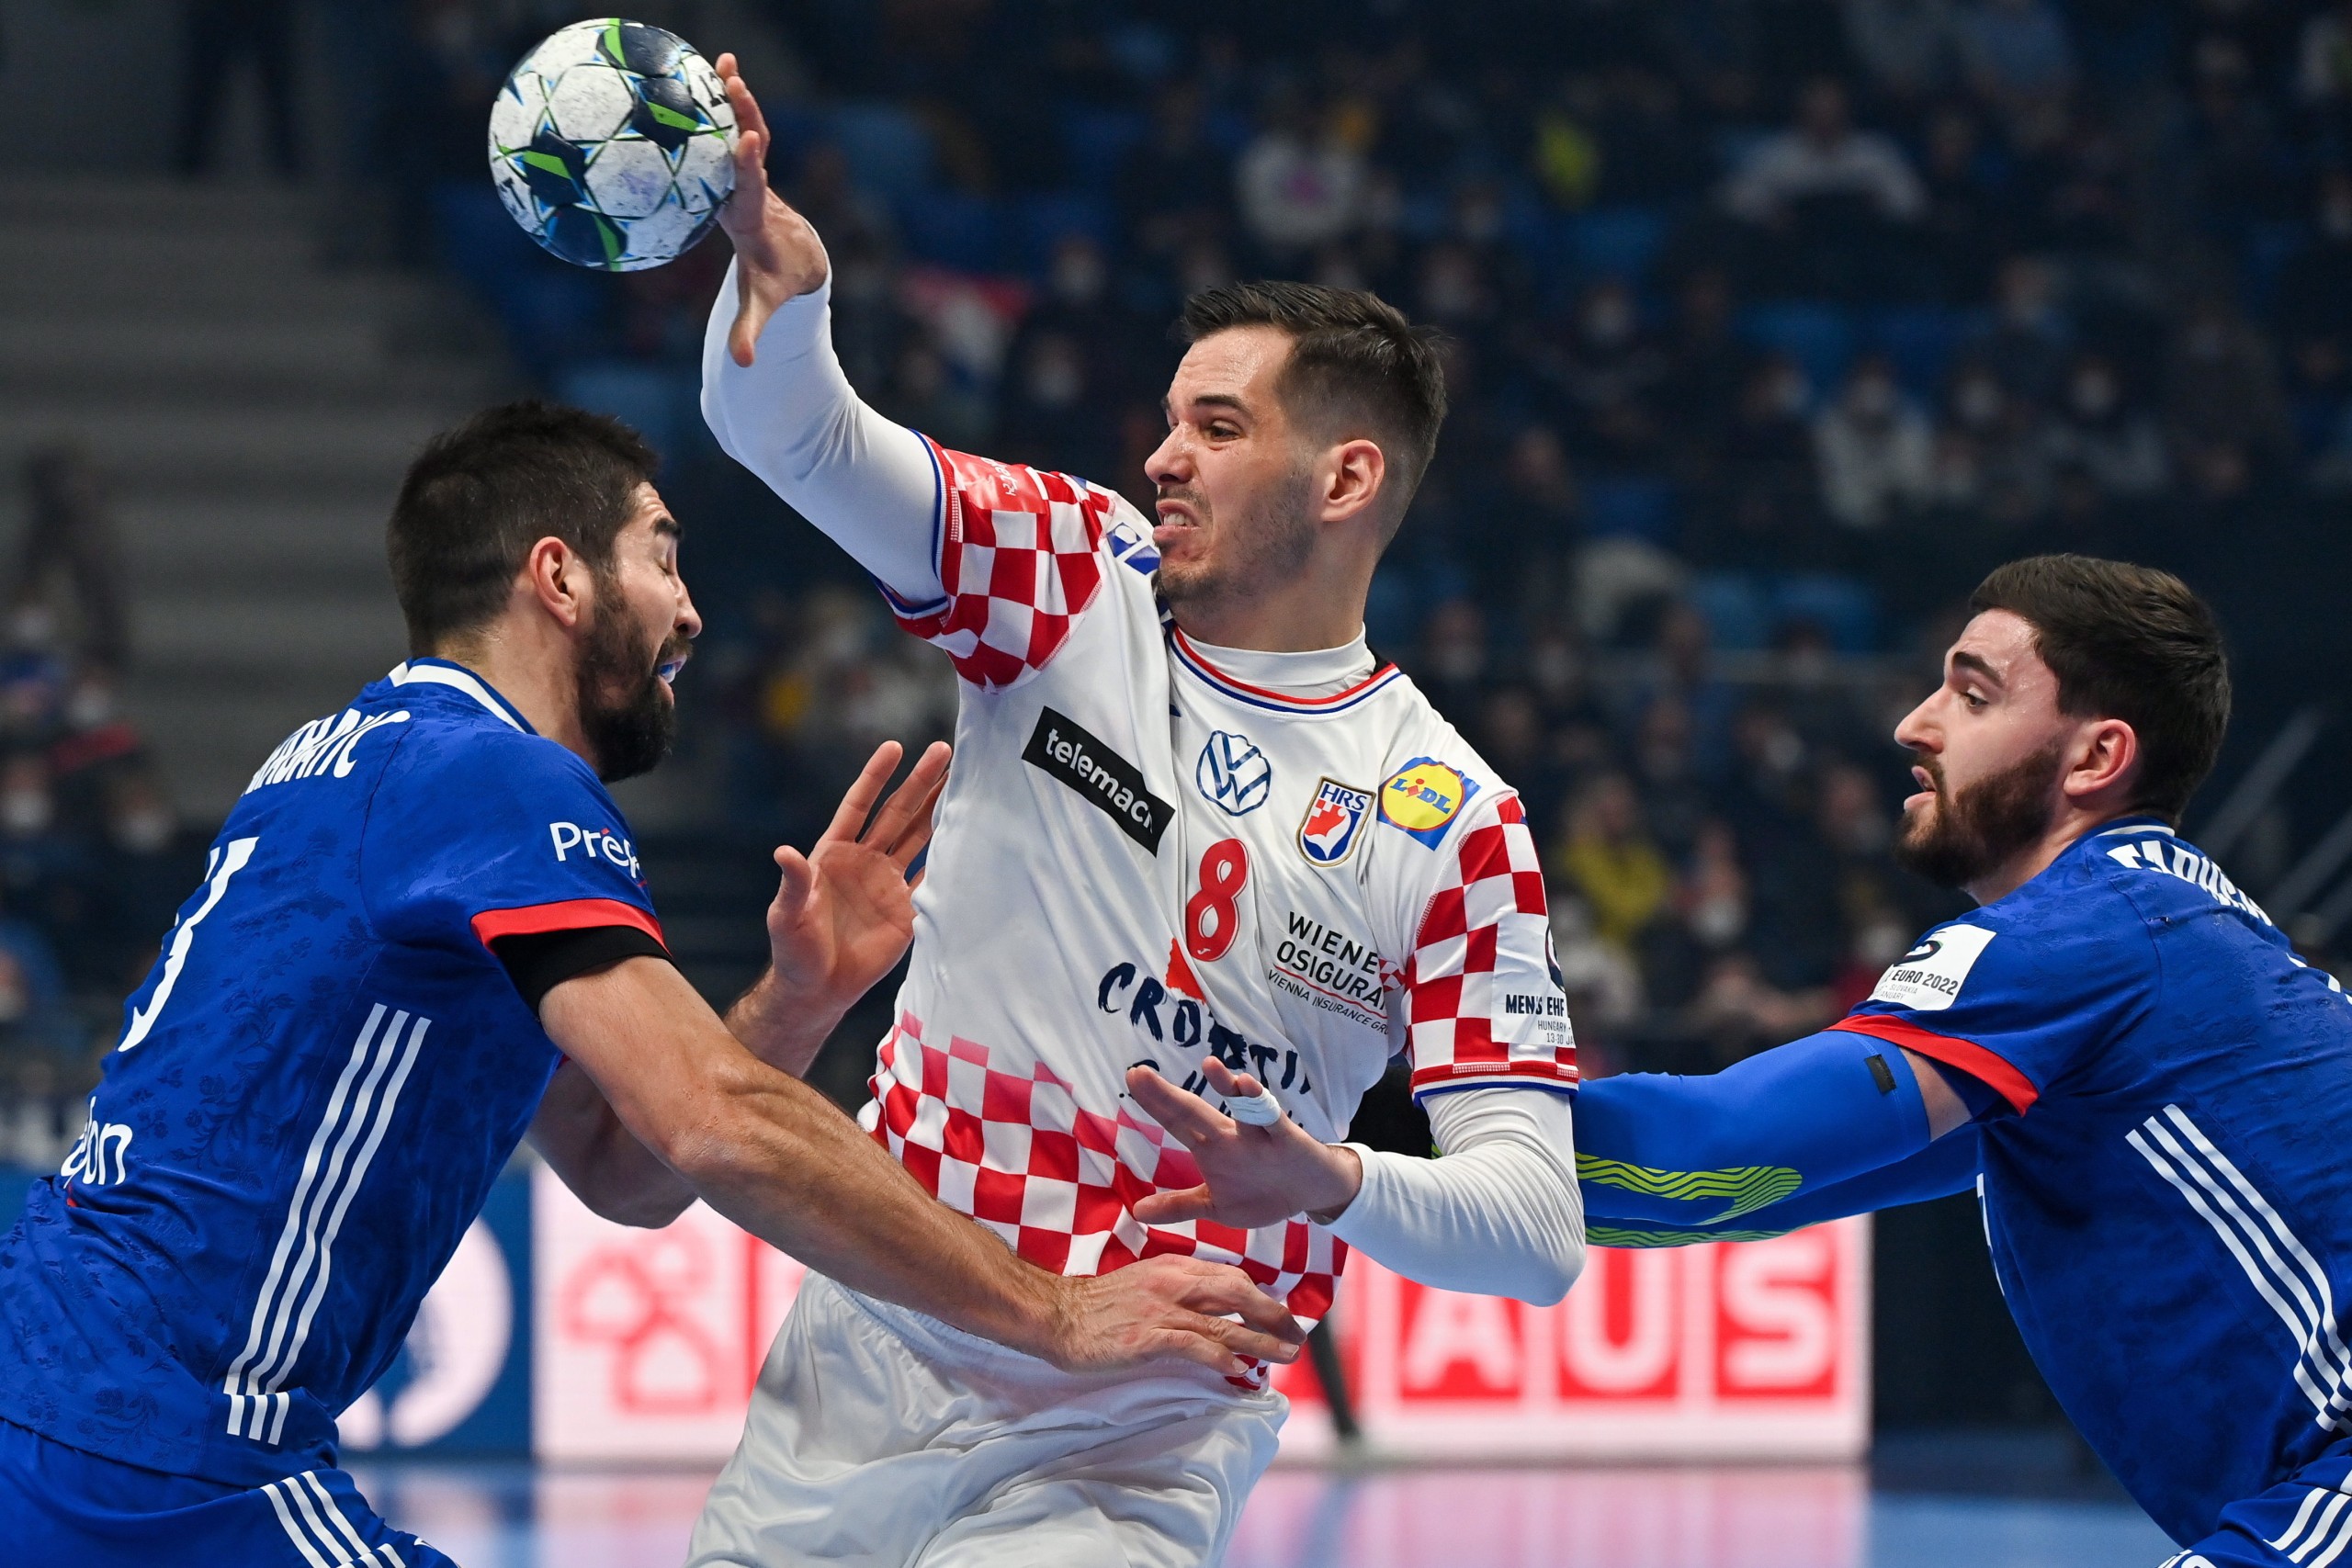 epa09683801 Ante Gadza (C) of Croatia in action against Nikola Karabatic (L) and Ludovic Fabregas of France during the Men's European Handball Championship preliminary round match between France and Croatia at  Pick Arena in Szeged, Hungary, 13 January 2022.  EPA/Tibor Illyes HUNGARY OUT